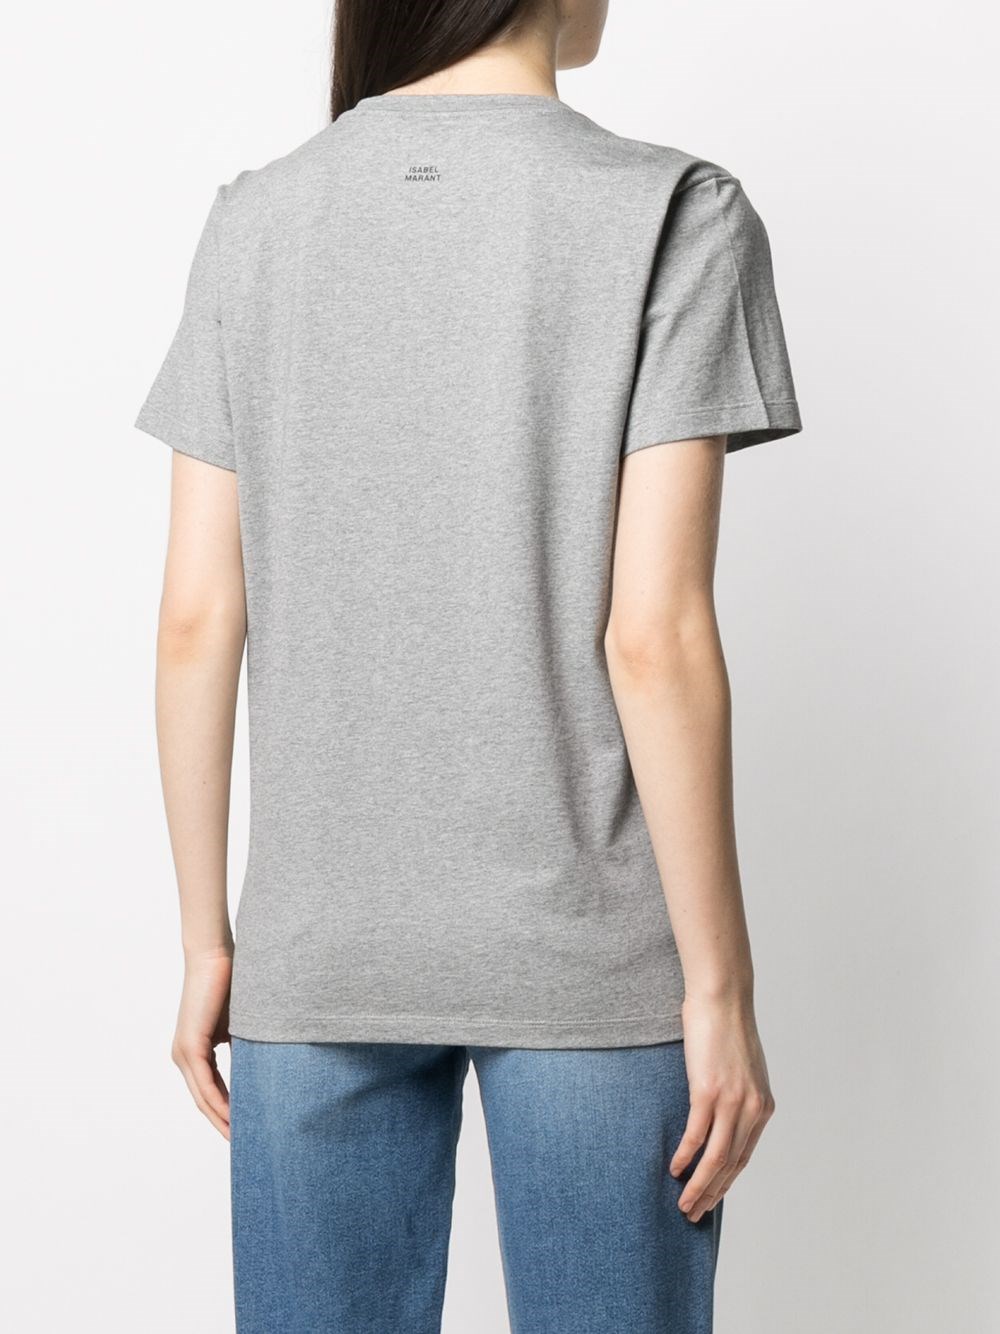 isabel marant T-SHIRT ANNAX available on montiboutique.com - 37882